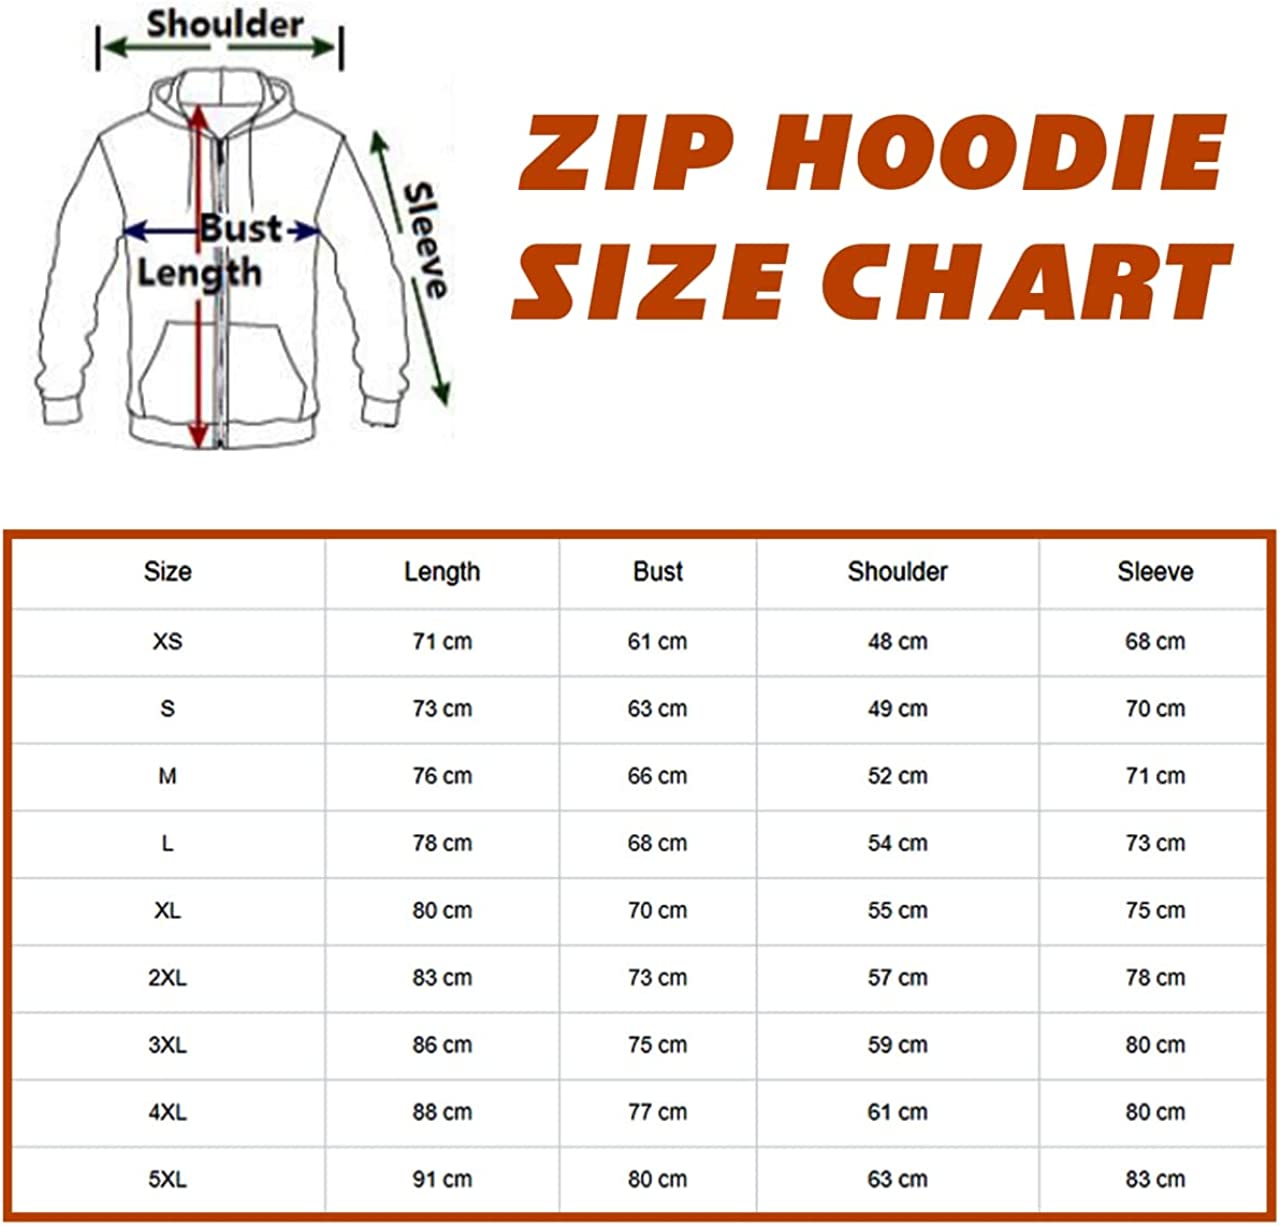 customized 3d printed glass installer shirt a unique gift for glass enthusiasts in 3d printed glass tee hawaiian shirt sweatshirt hoodie zip hoodies and over printing variants. jot1442 wwzxp